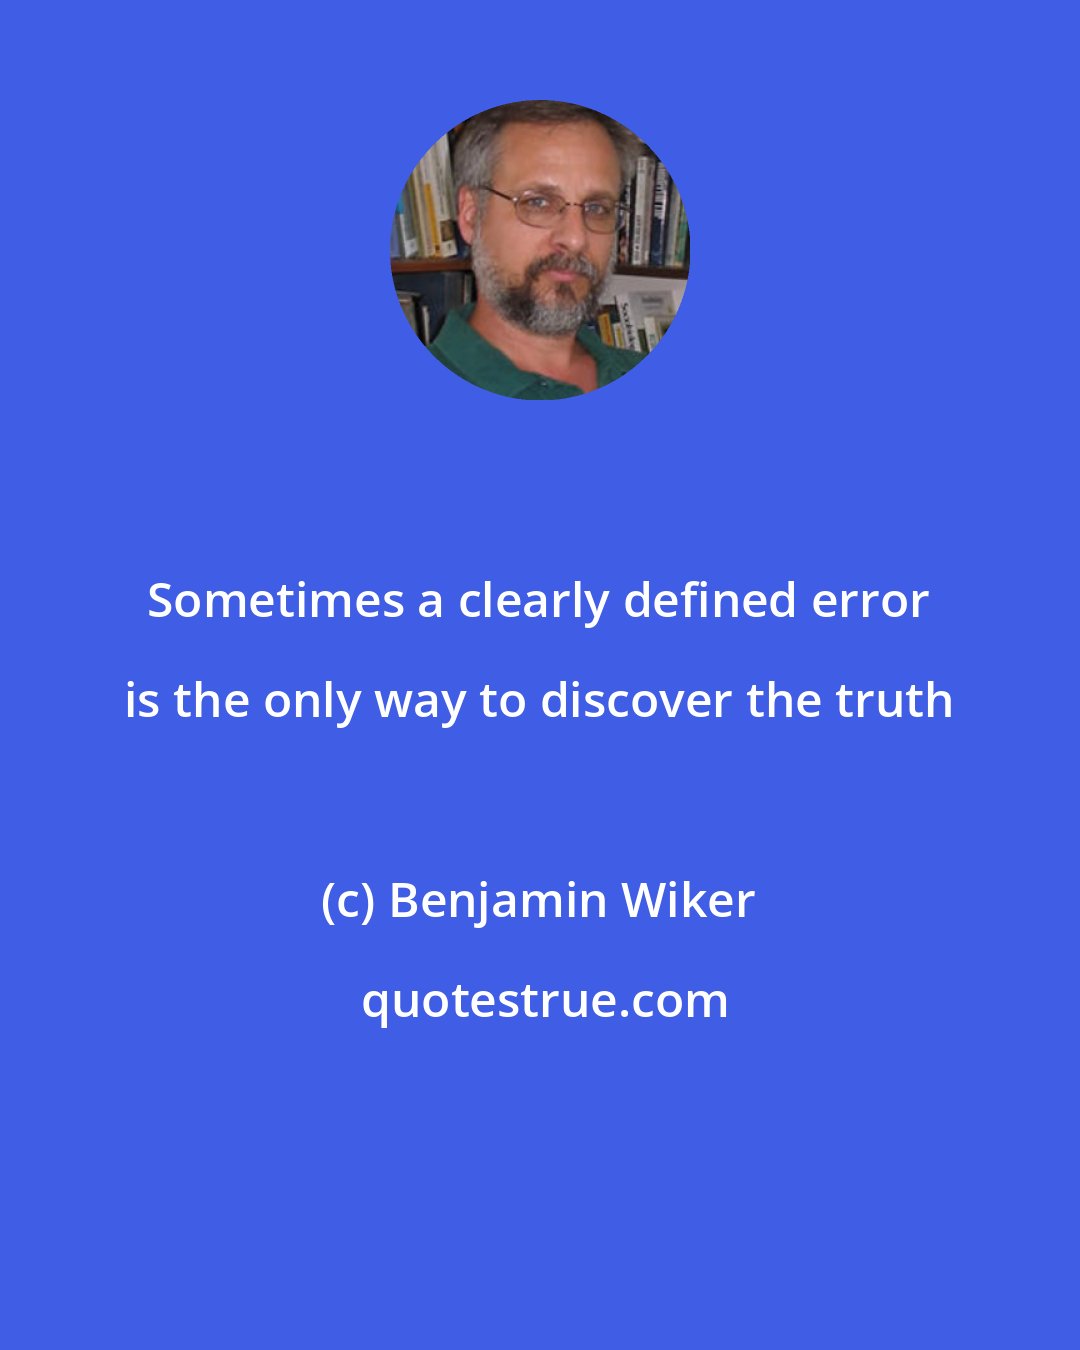 Benjamin Wiker: Sometimes a clearly defined error is the only way to discover the truth